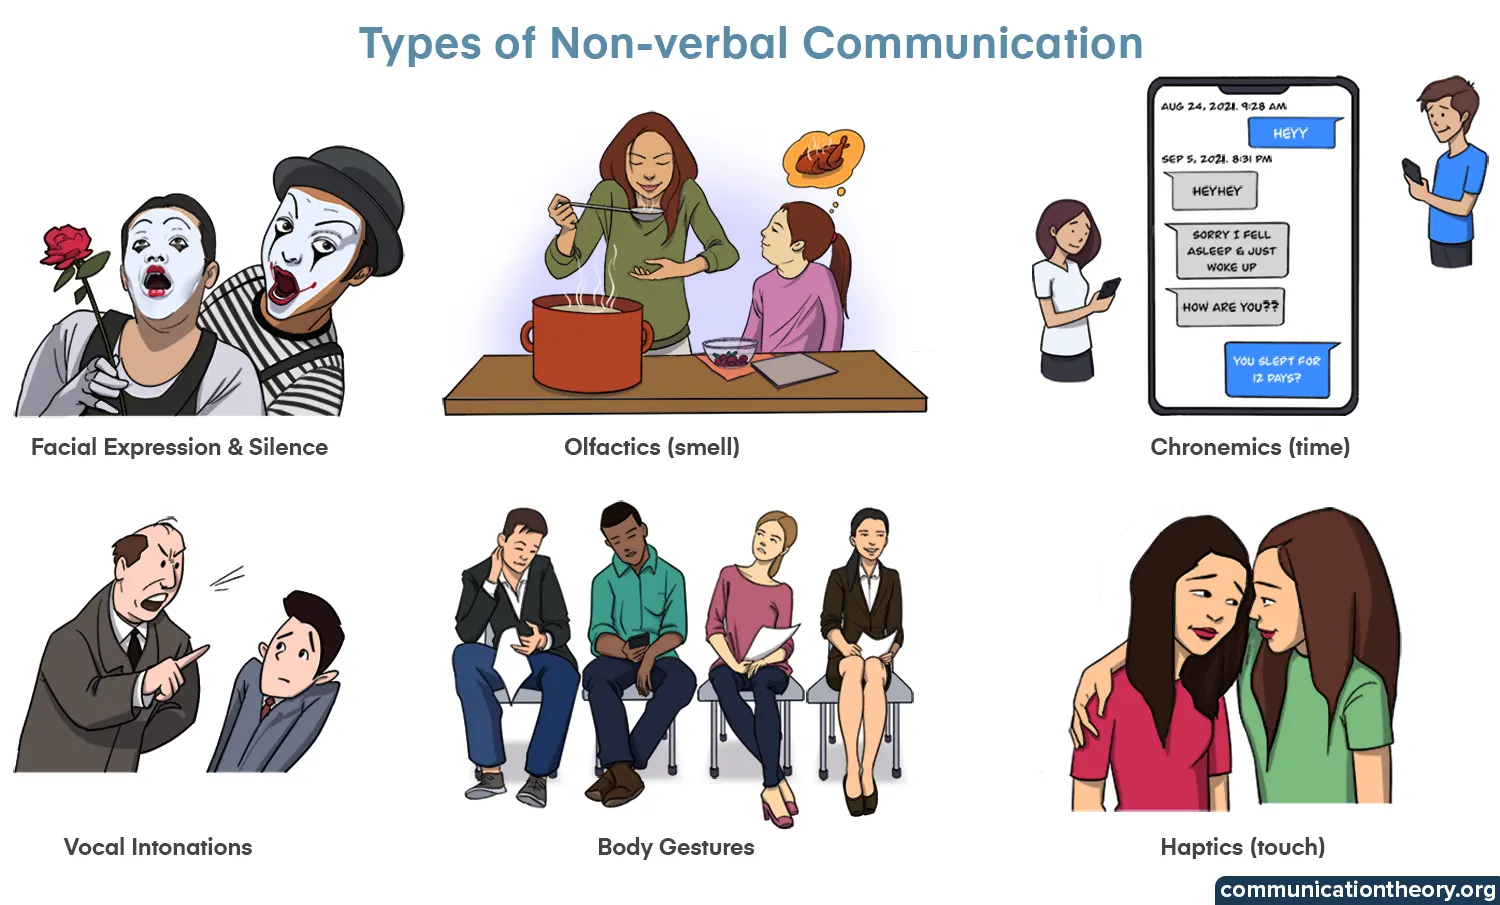 is texting nonverbal communication